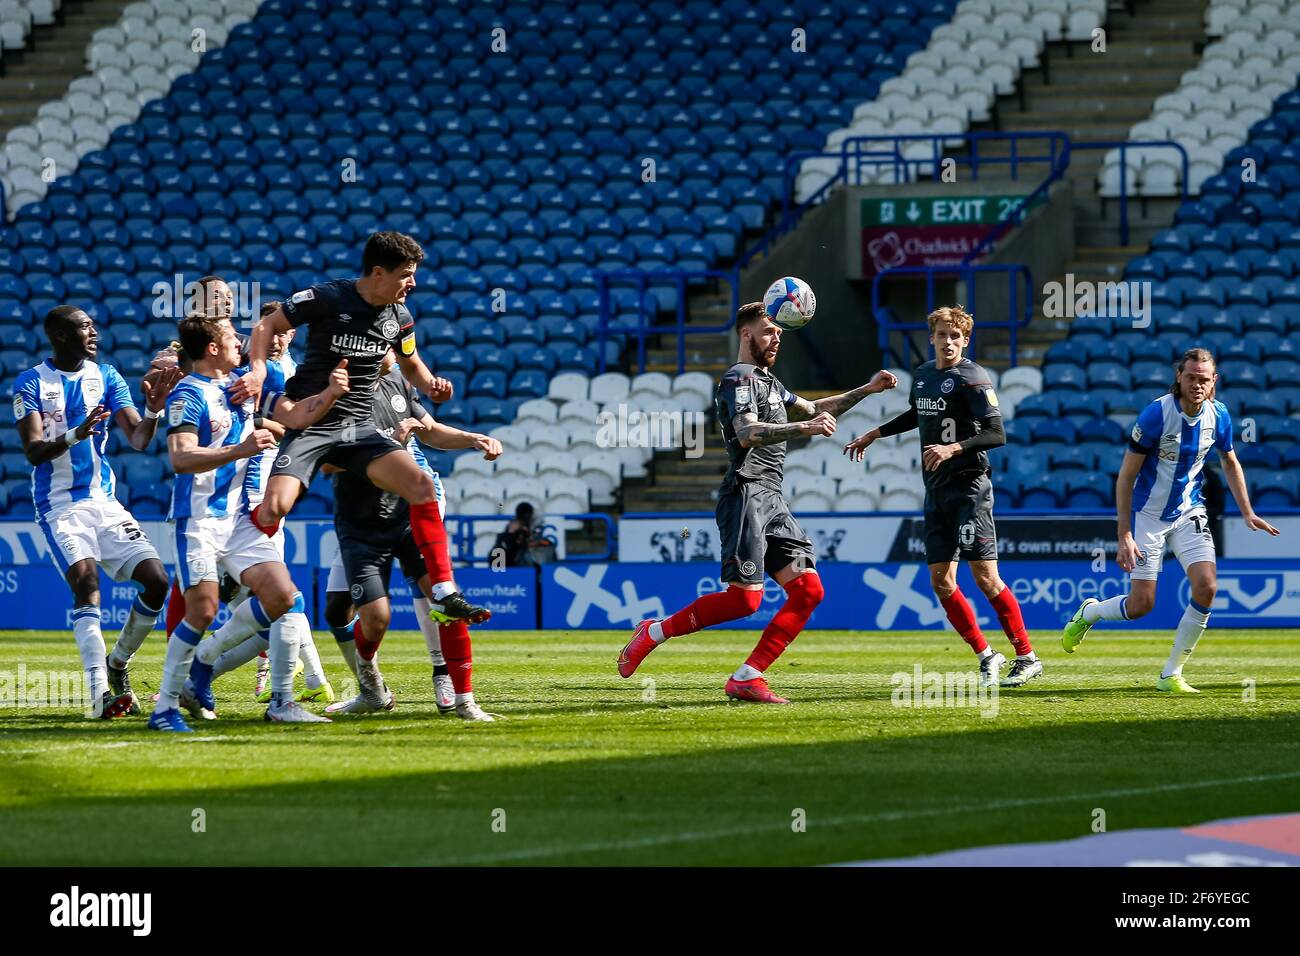 Pontus Jansson #18 of Brentford attempts to head the ball at goal  in Huddersfield, UK on 4/3/2021. (Photo by James Heaton/News Images/Sipa USA) Stock Photo